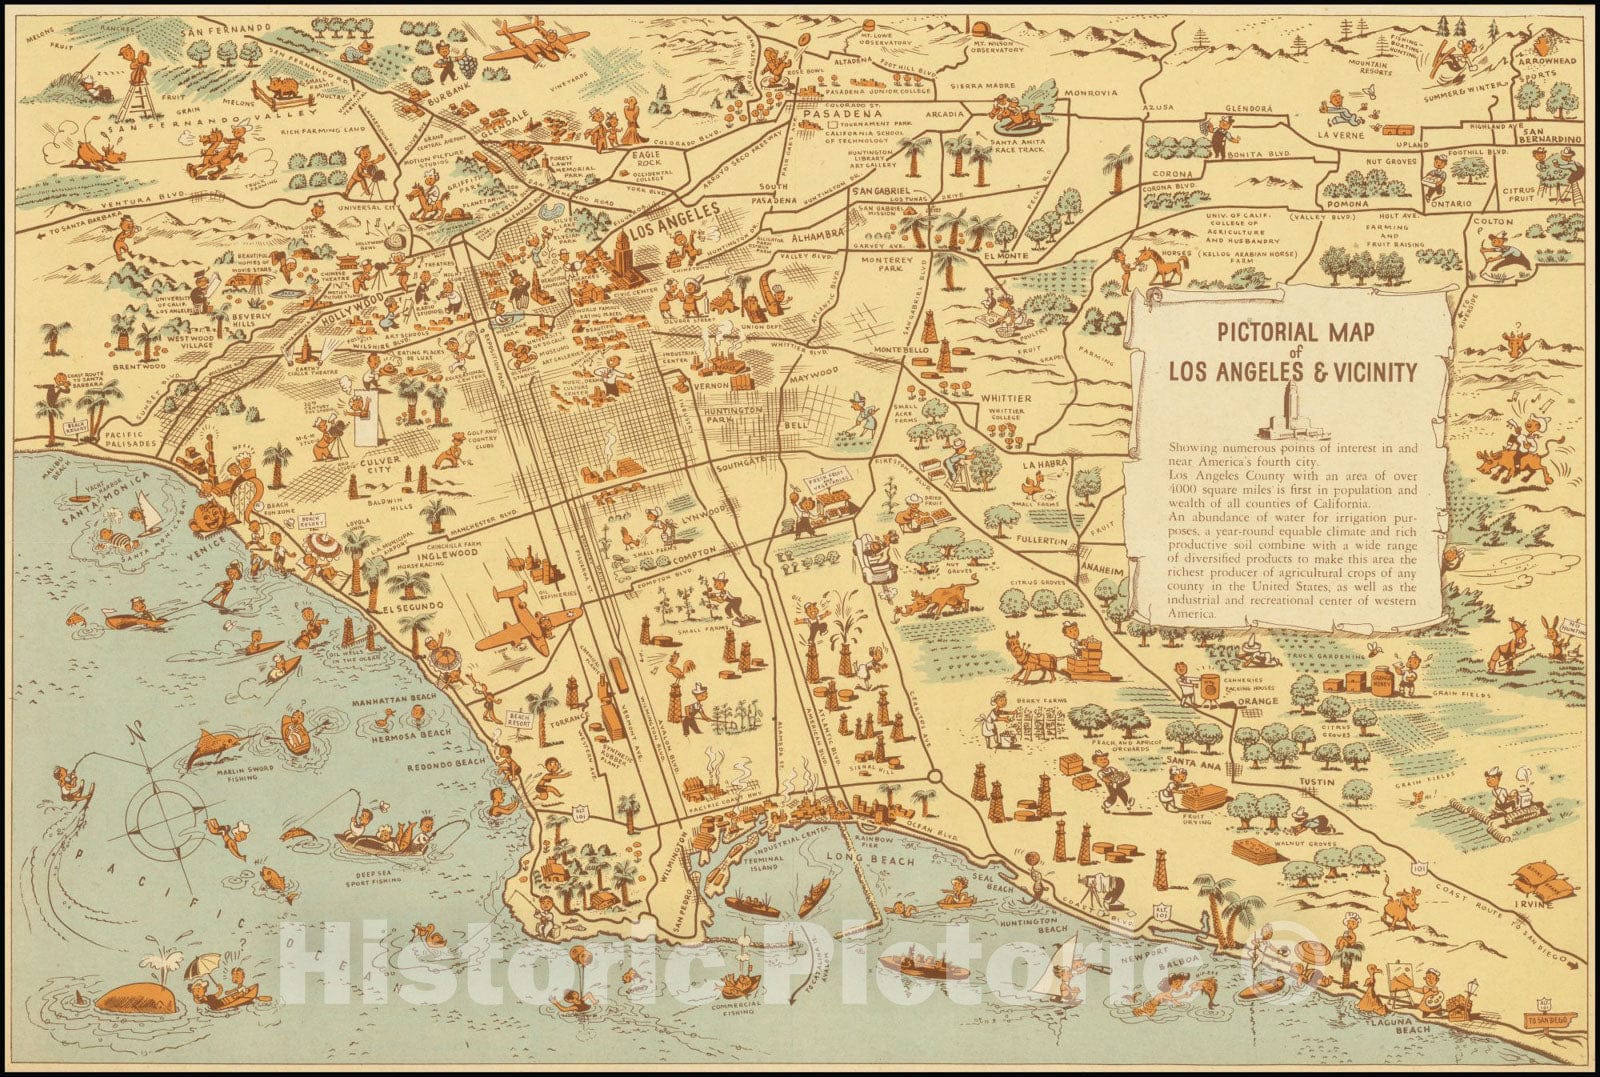 Historic Map : Pictorial Los Angeles & Vicinity - Pictorial Map Metropolitan Area - California the Golden State, 1940, Vintage Wall Art